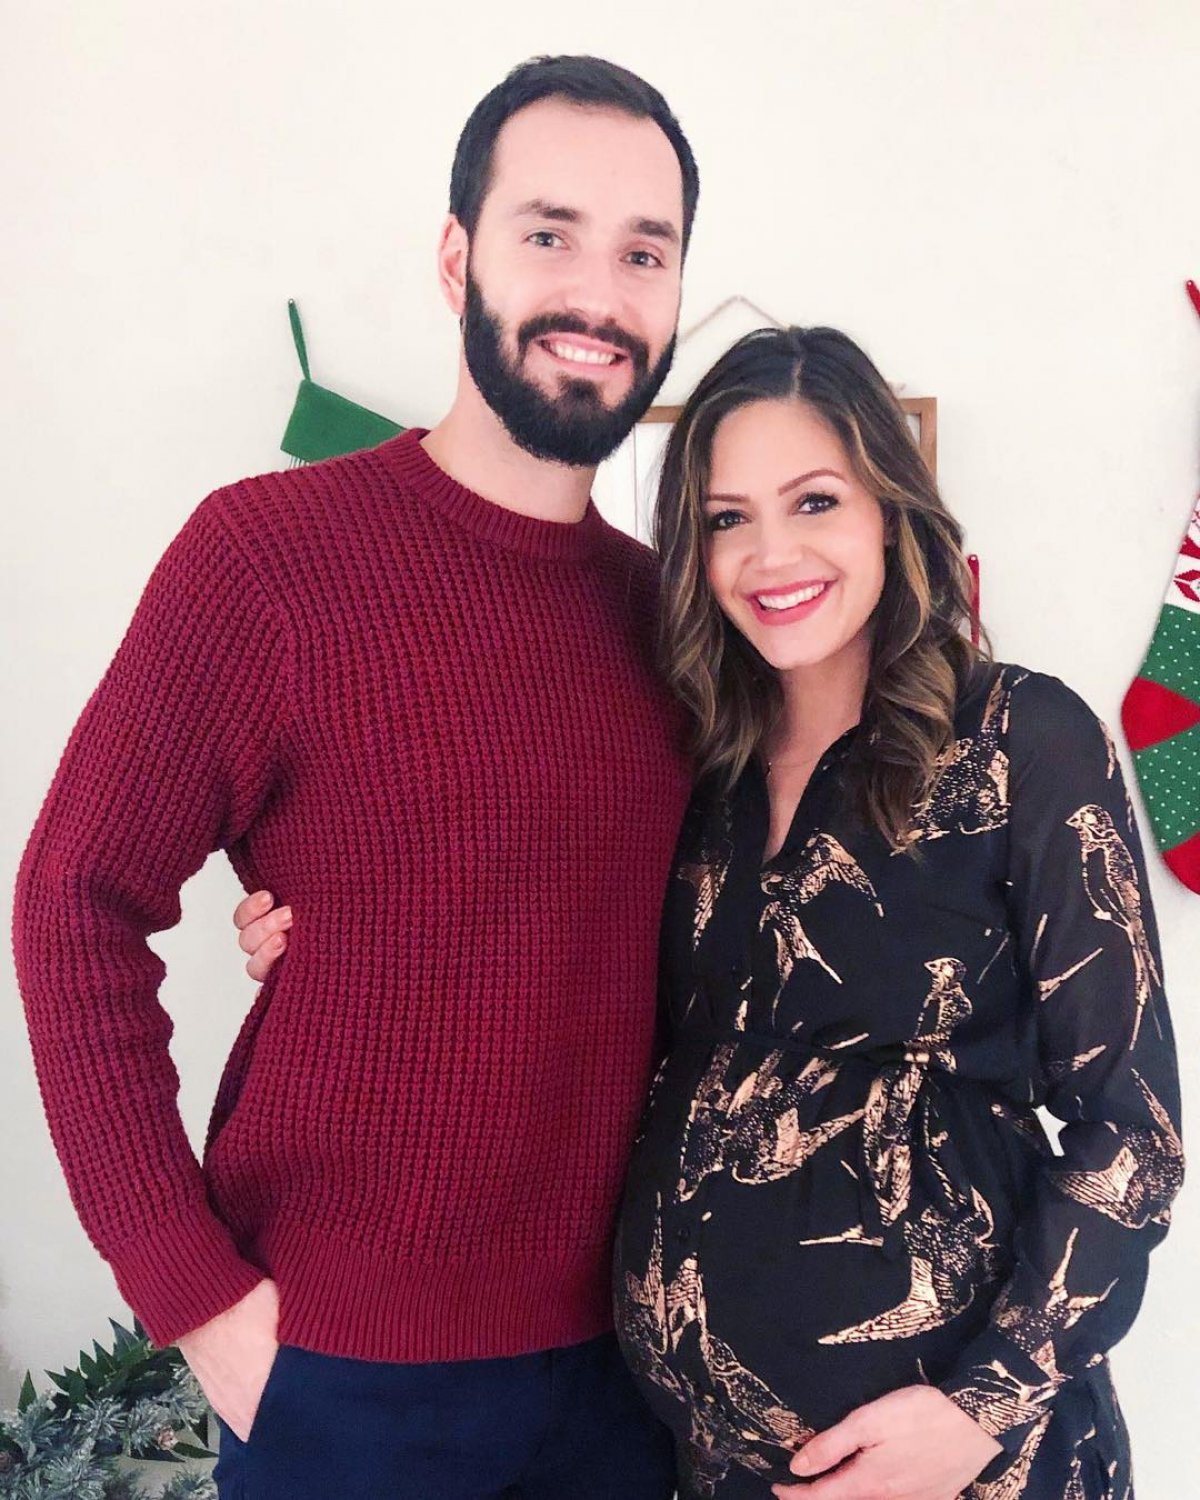 'The Bachelorette' couple Desiree Hartsock and Chris Siegfried welcome second baby ...1200 x 1500